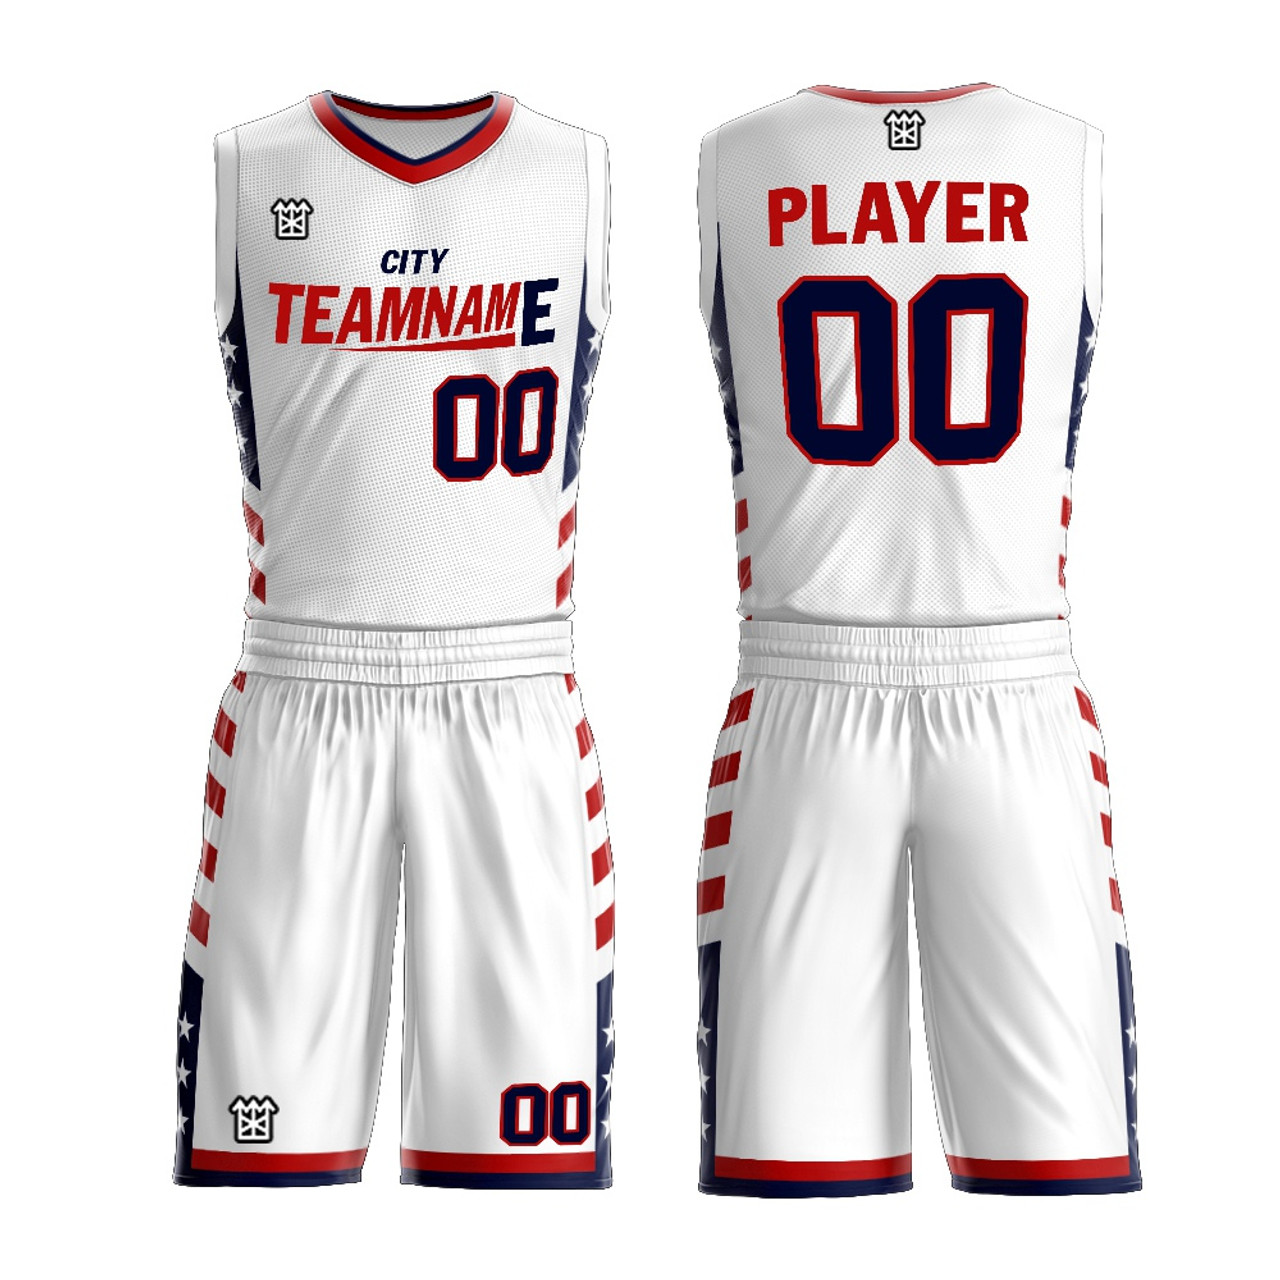 Customize International Reversible Basketball Jerseys With Numbers